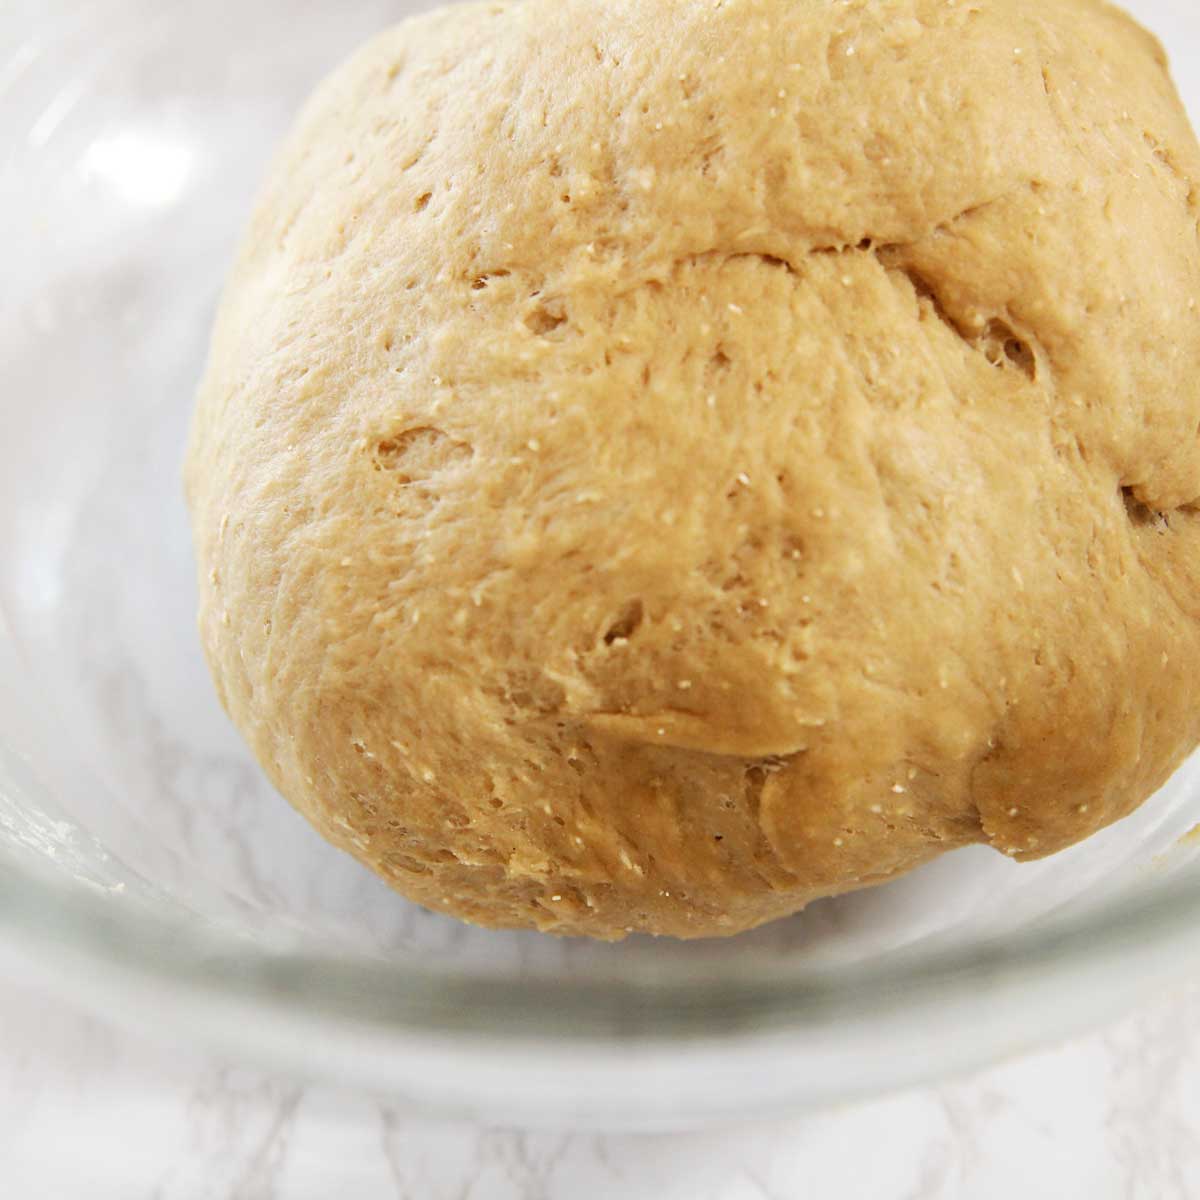 100% Whole Wheat Steamed Buns Recipe (Chinese Tangzhong Baozi Dough) - Whole Wheat Steamed Buns